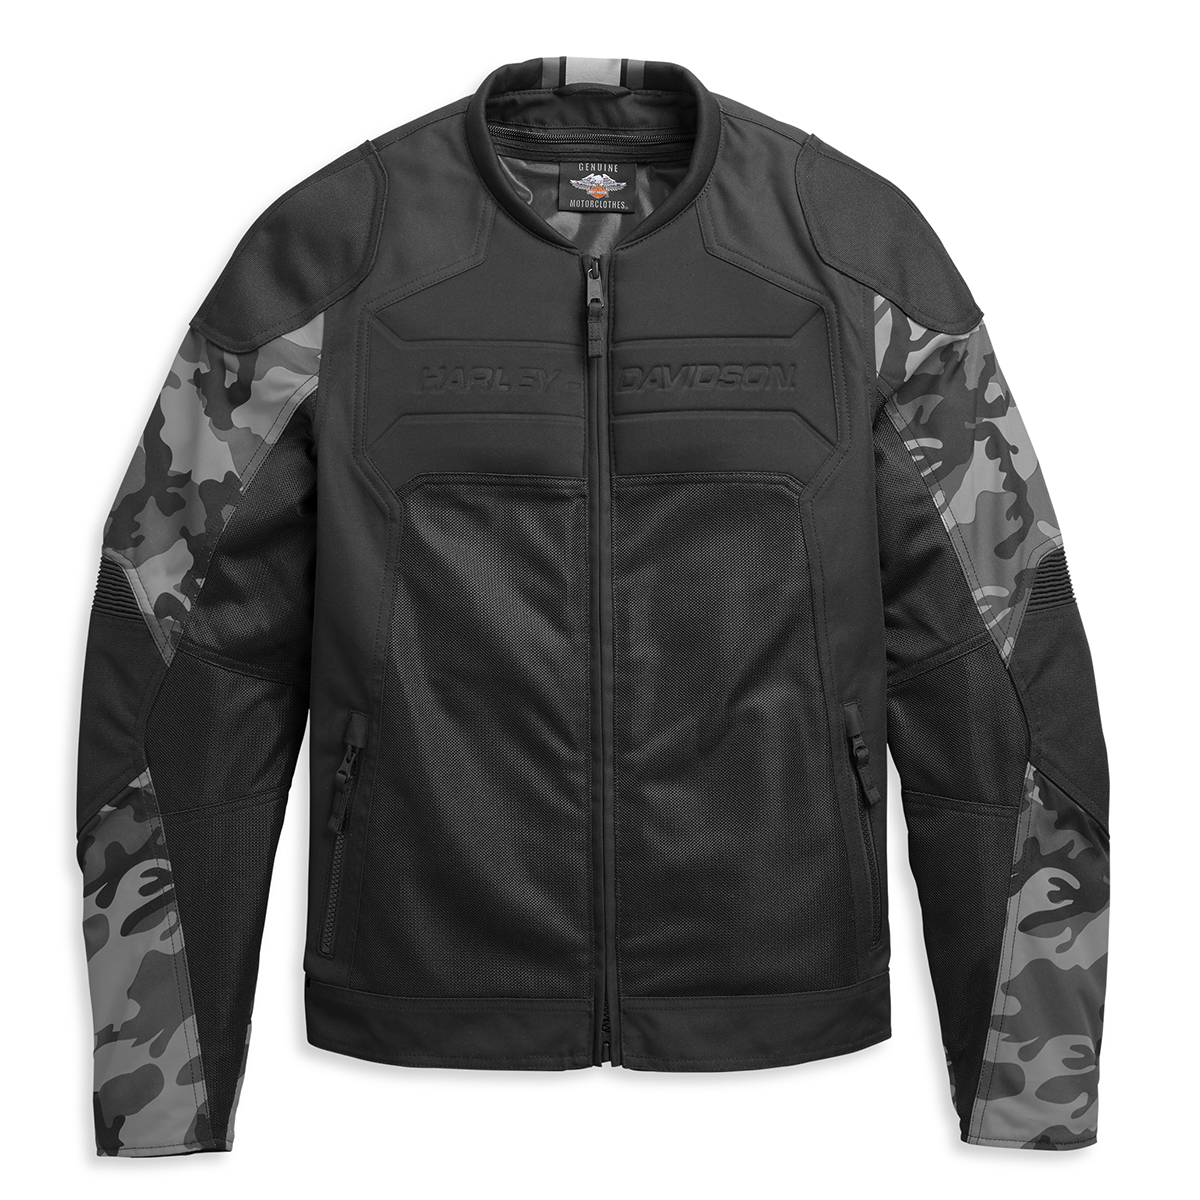 HARLEY-DAVIDSON FXRG LEATHER JACKET - clothing & accessories - by